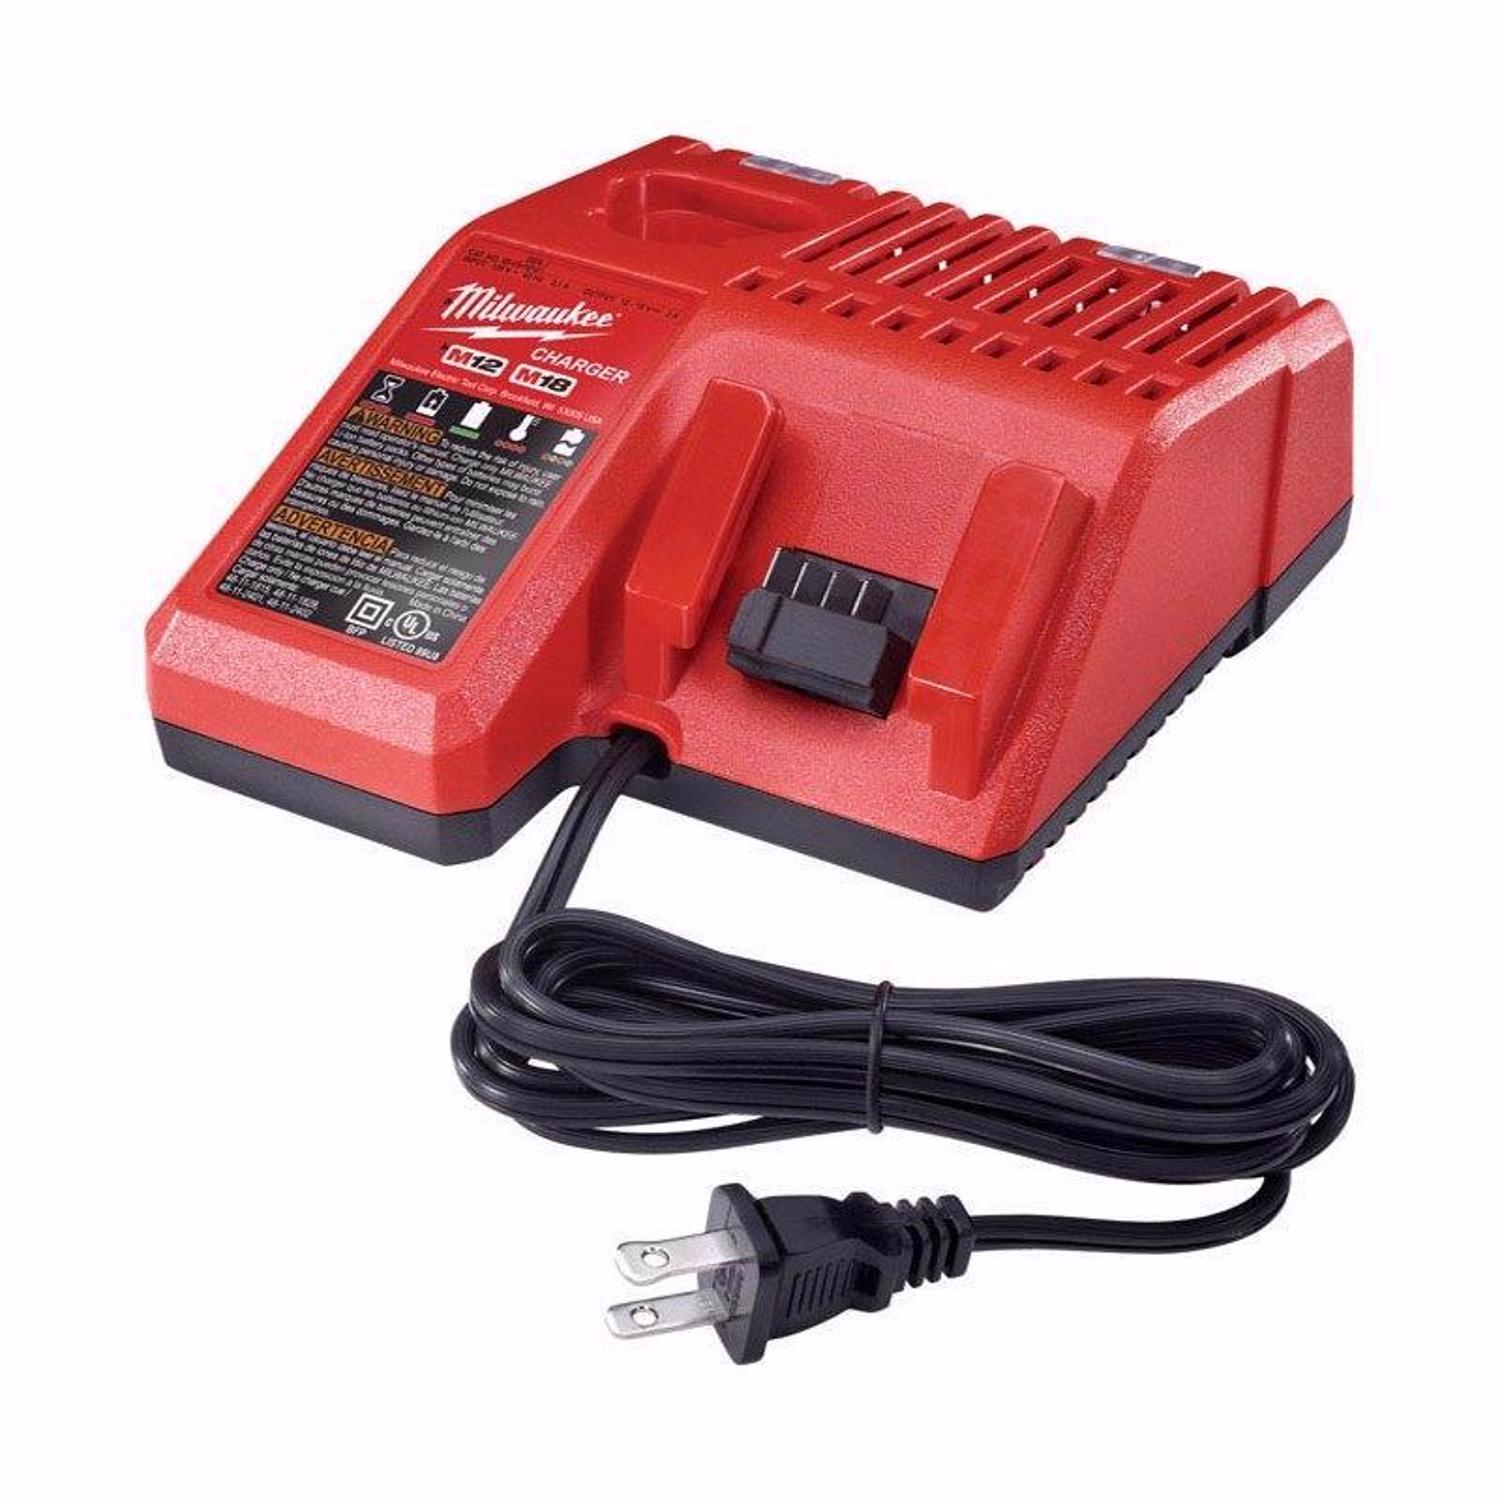 Photos - Battery Charger Milwaukee M18/M12 18/12 V Wall  1 pc 48-59-1812 